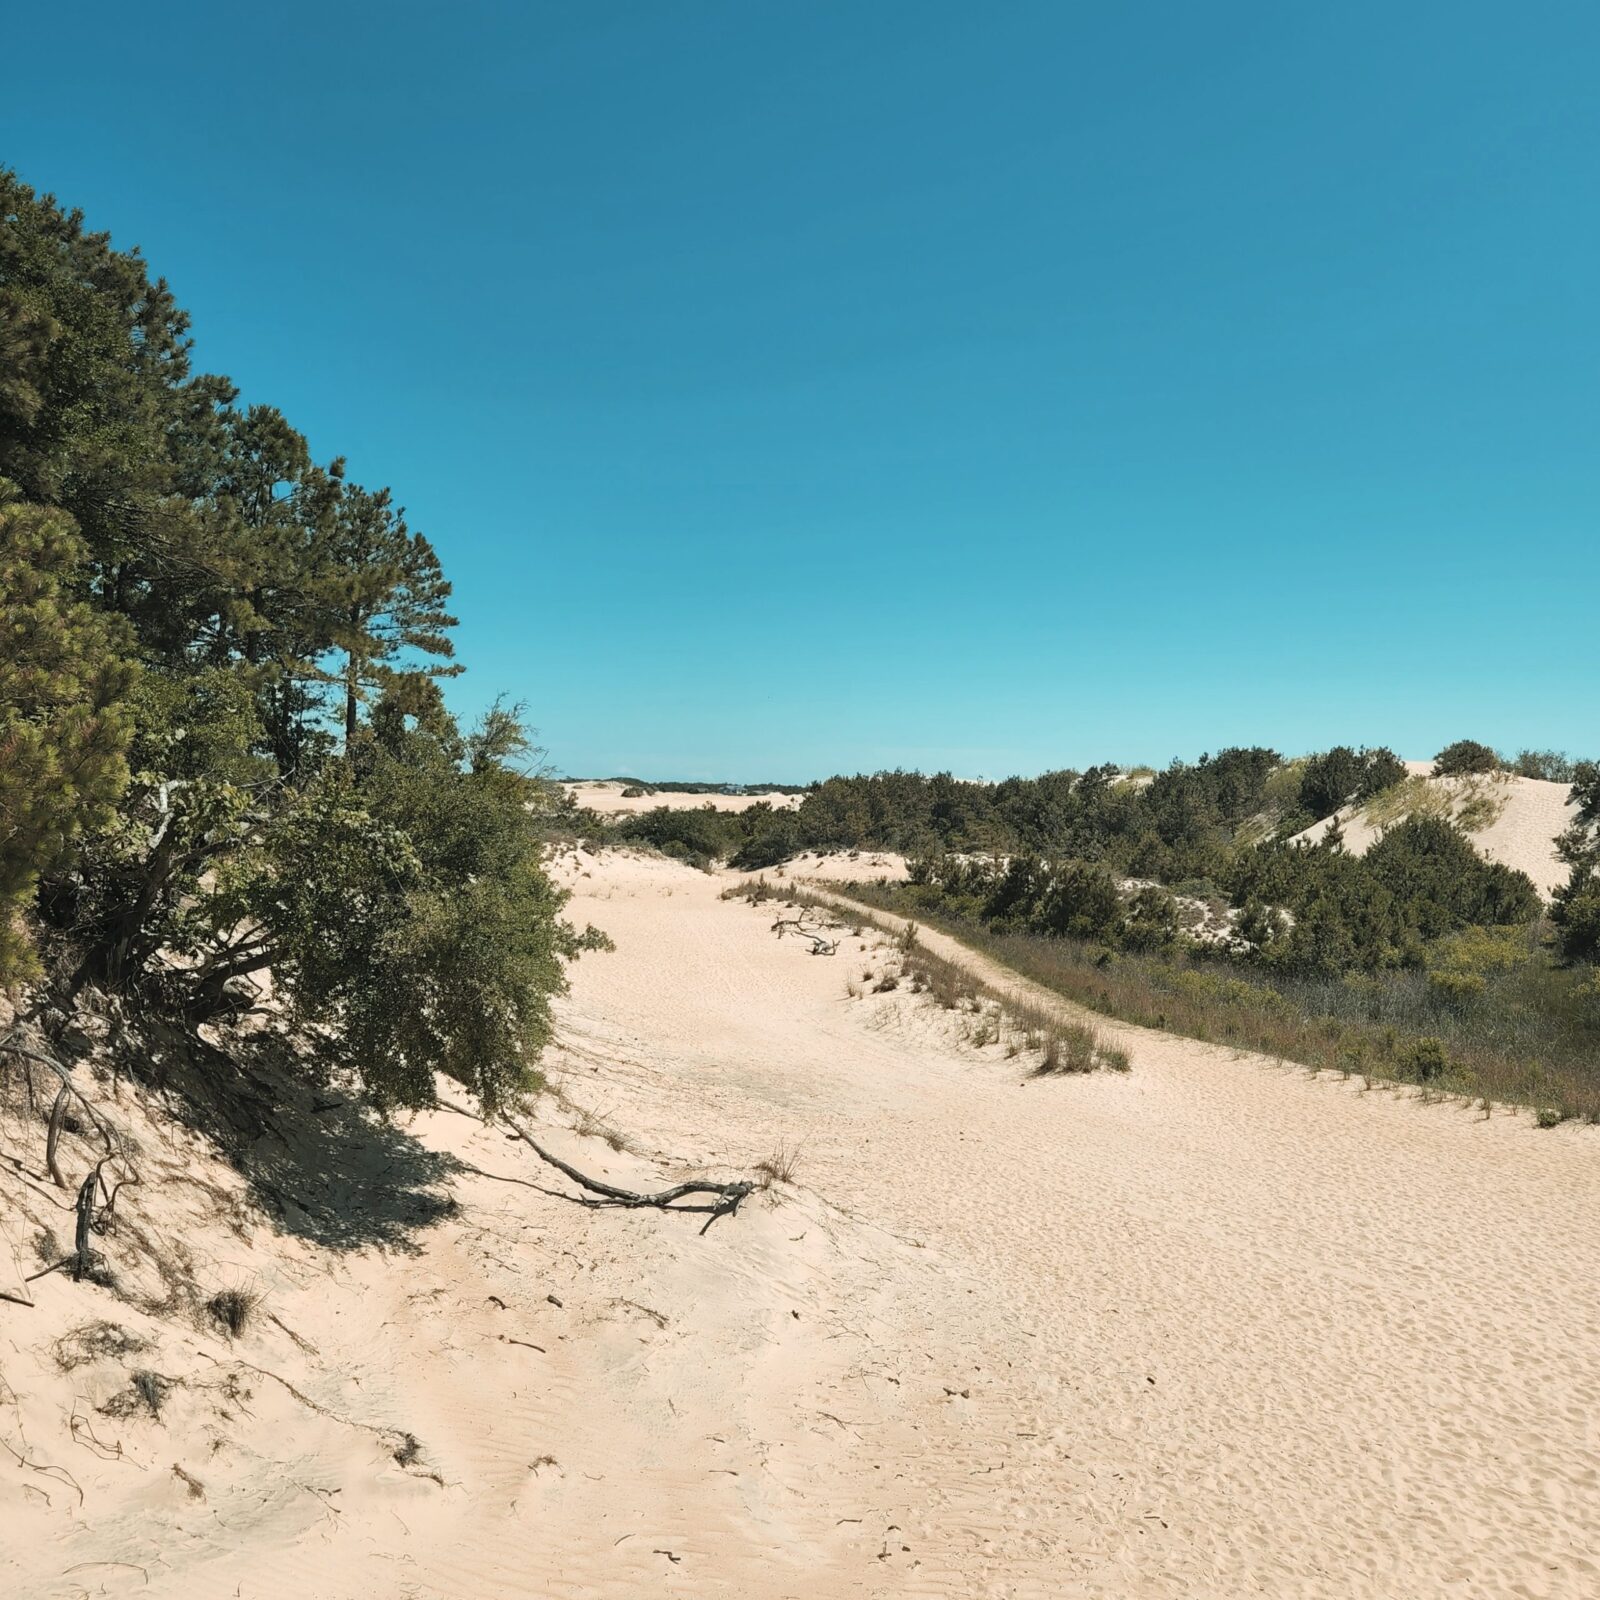 dunes at jockey's ridge state park in the outer banks